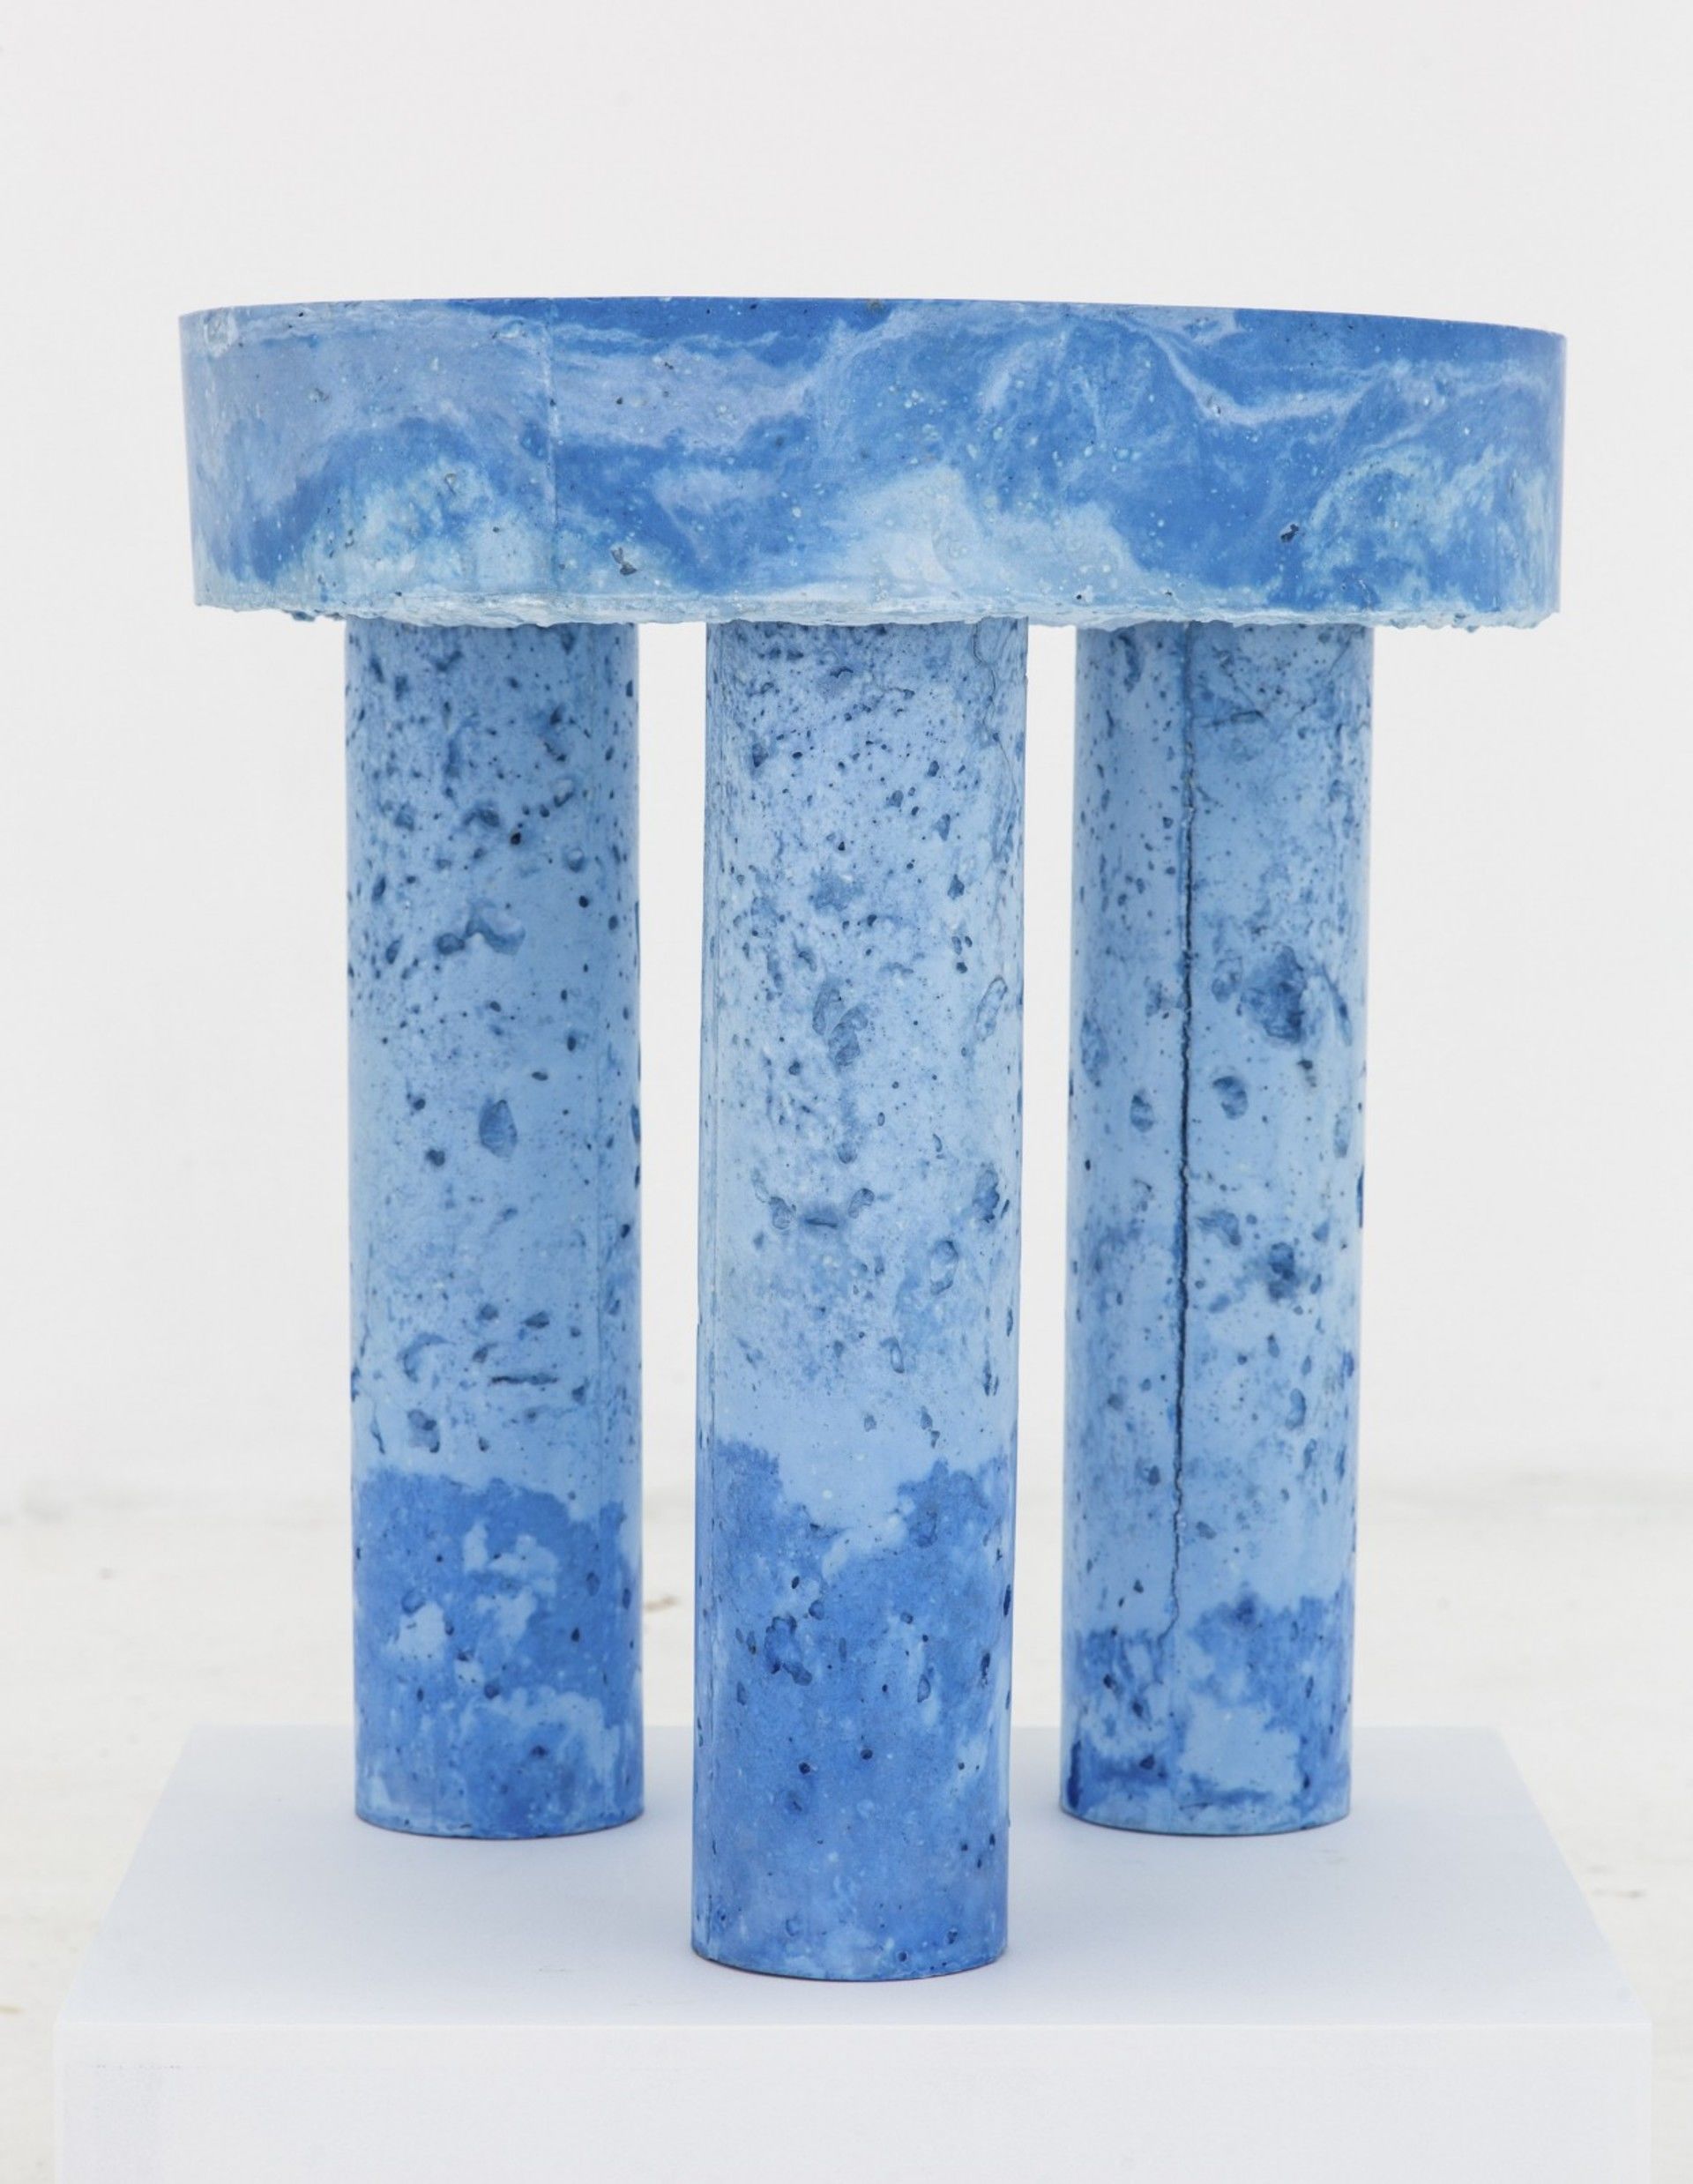 Blue Pulp Table by Katie Stout for exhibition Docile/Domicile/Dandy at Gallery Diet, Miami 2015